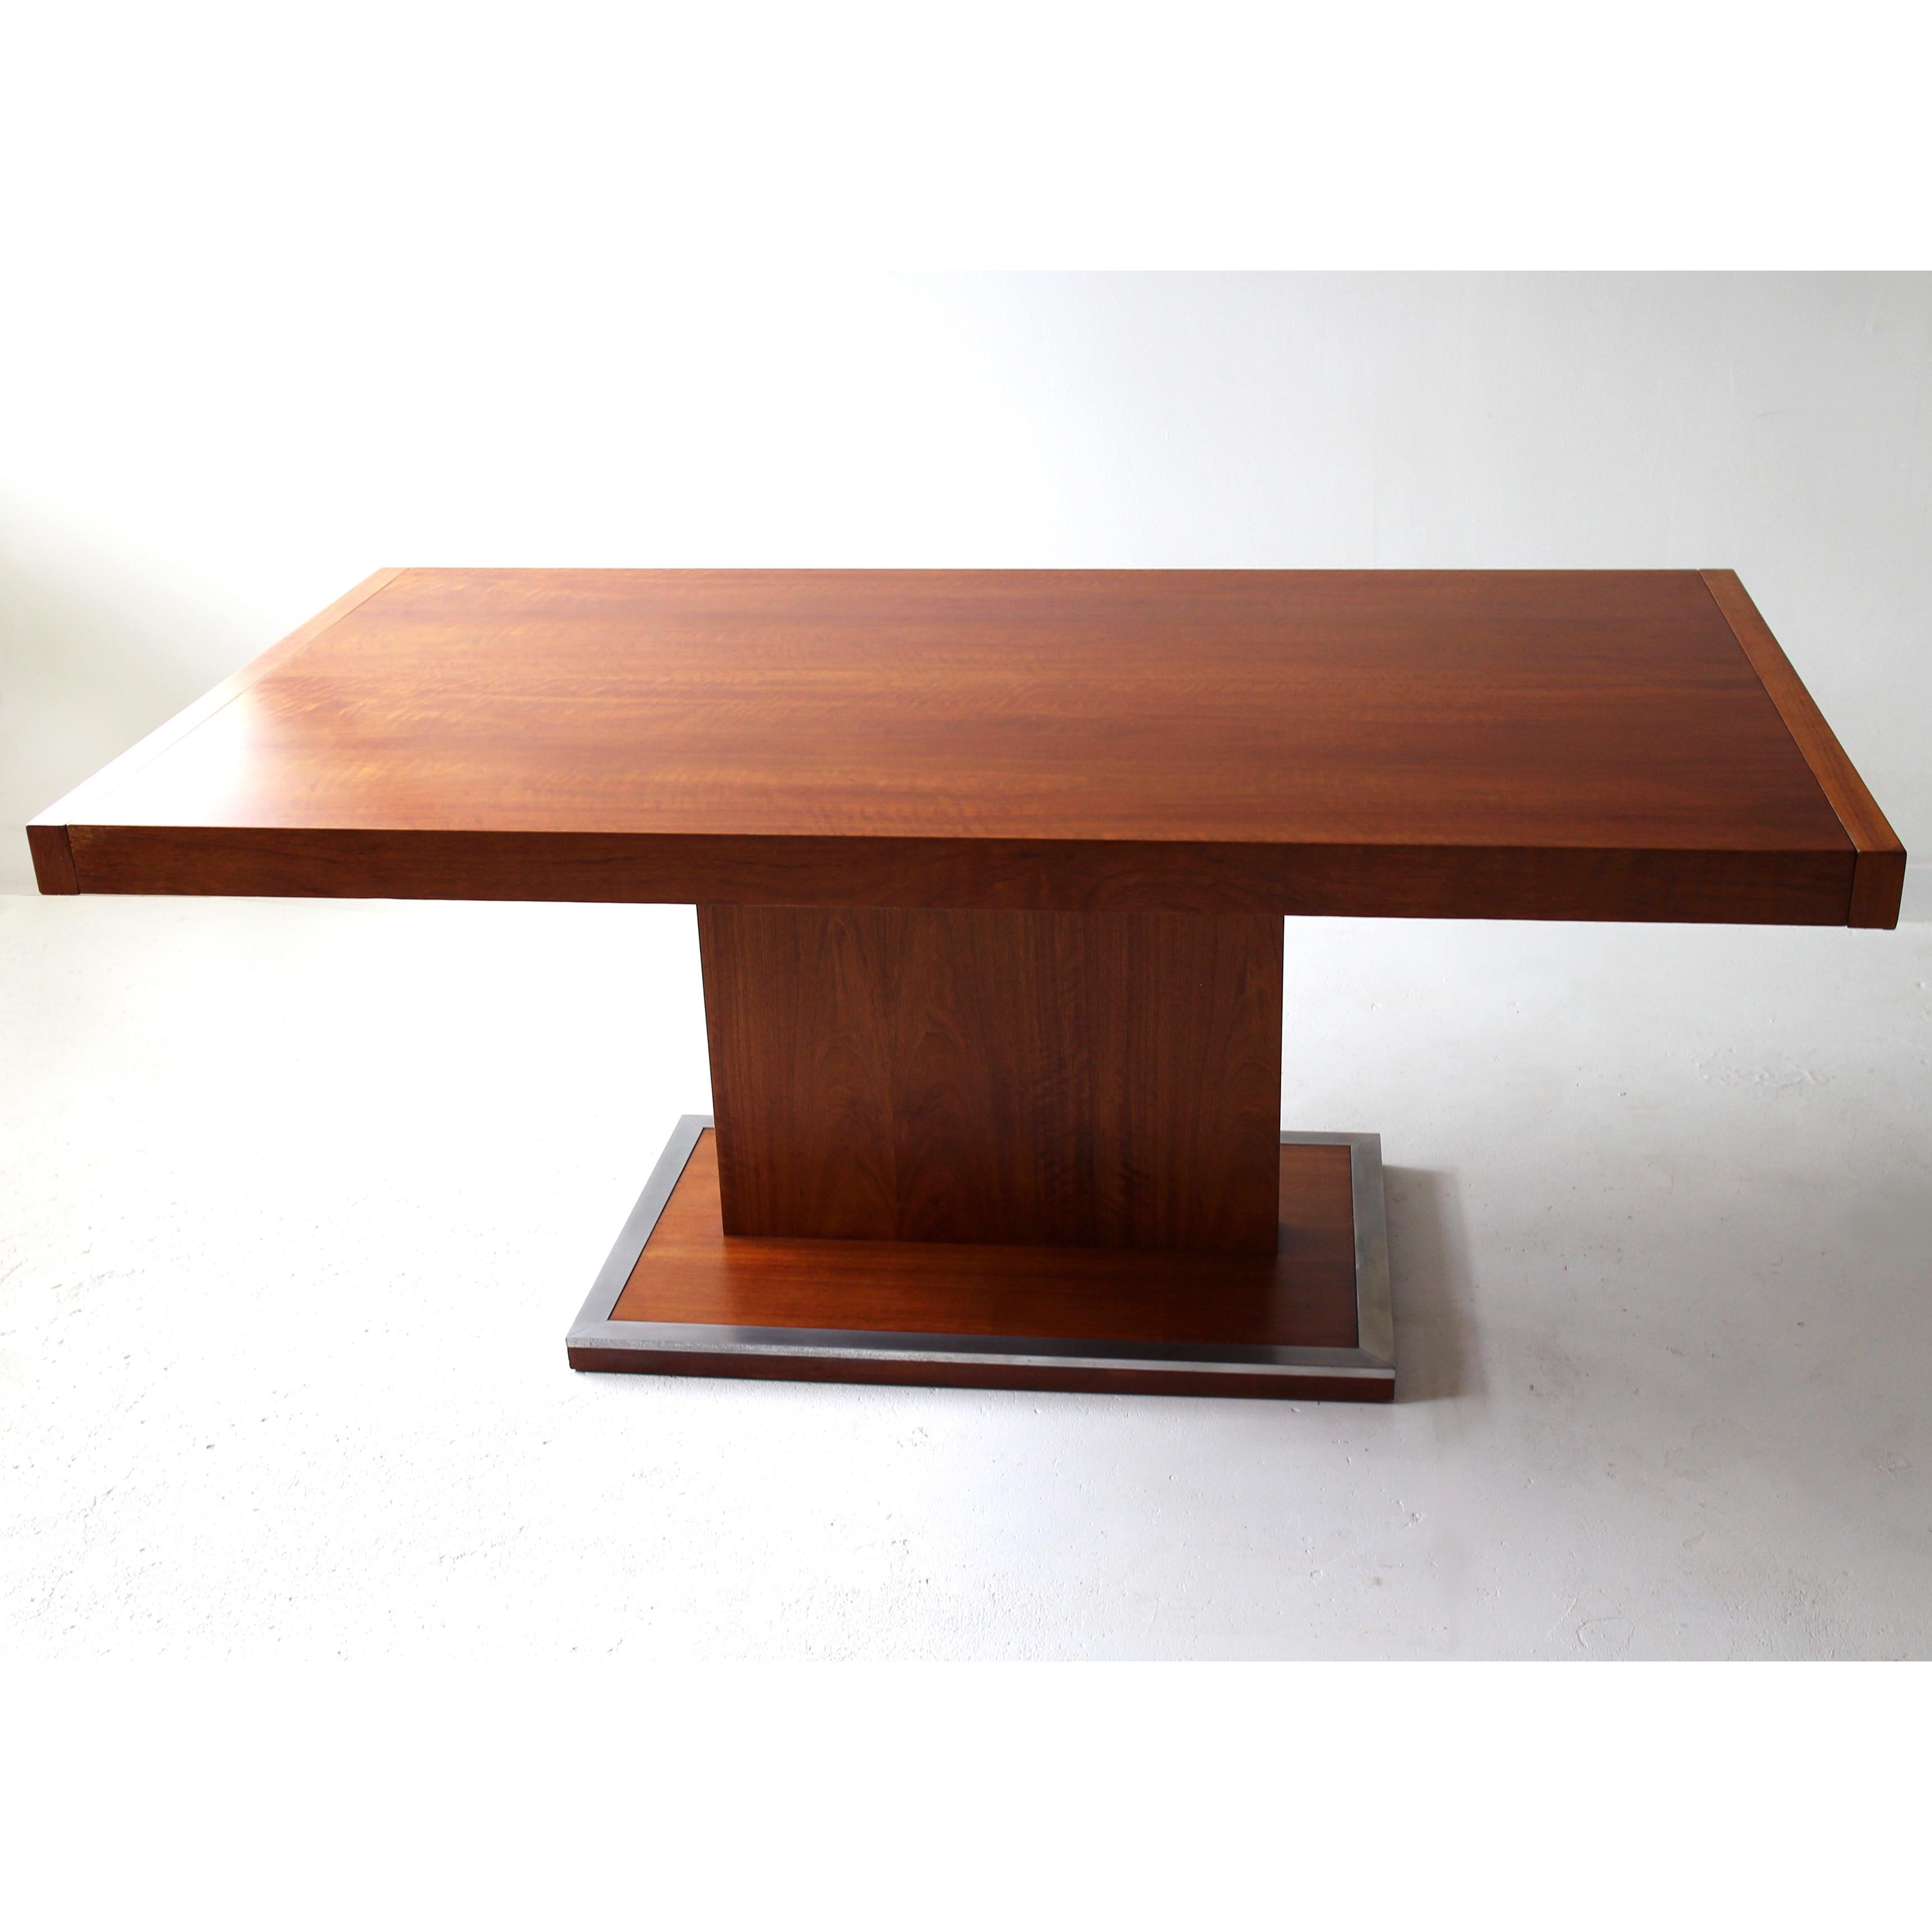 This original Mid-Century Milo Baughman expandable walnut dining table by Founders Furniture Company is a rare find. Only one previous owner, in great condition with polished aluminum edged pedestal base and 2pc additional leaves. The table has been